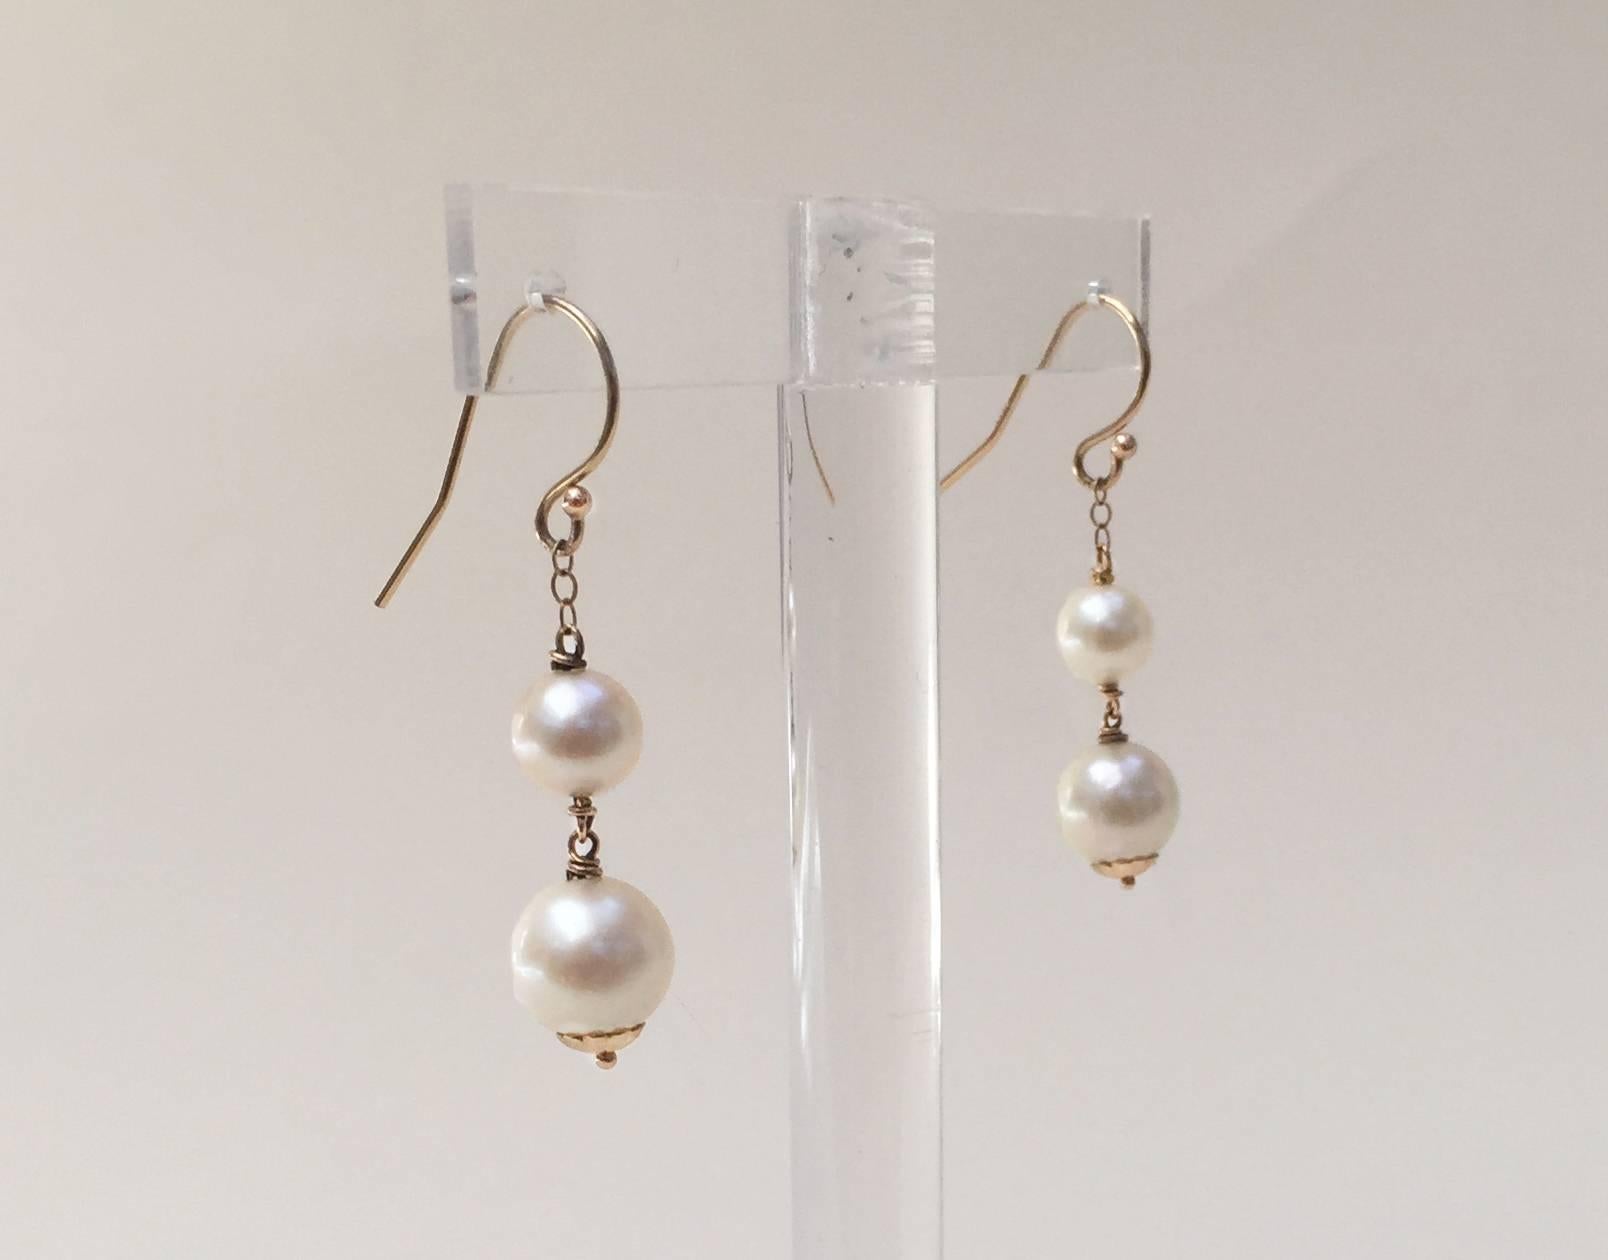 These simple, yet elegant double pearl earrings hang at approximately 1 inch. The small and large pearls play off of each other to shine more brilliantly. With 14k yellow gold hook and wiring the earrings have a golden warm hue. At the bottom of